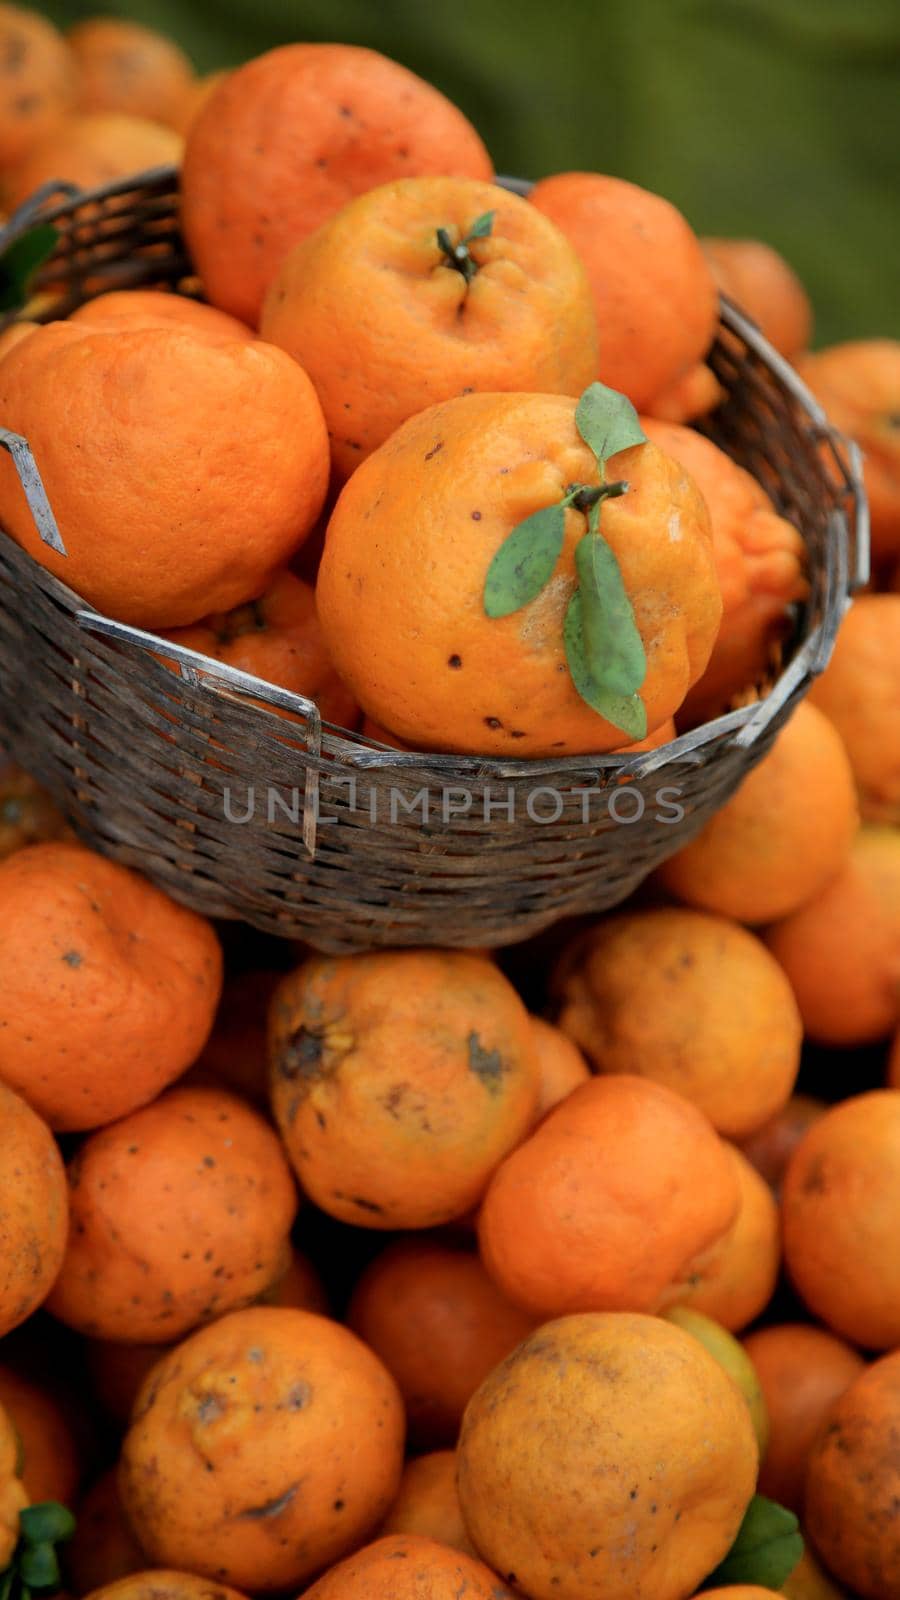 salvador, bahia / brazil - july 10, 2020: tangerine fruit are seen for sale in the city of Salvador.